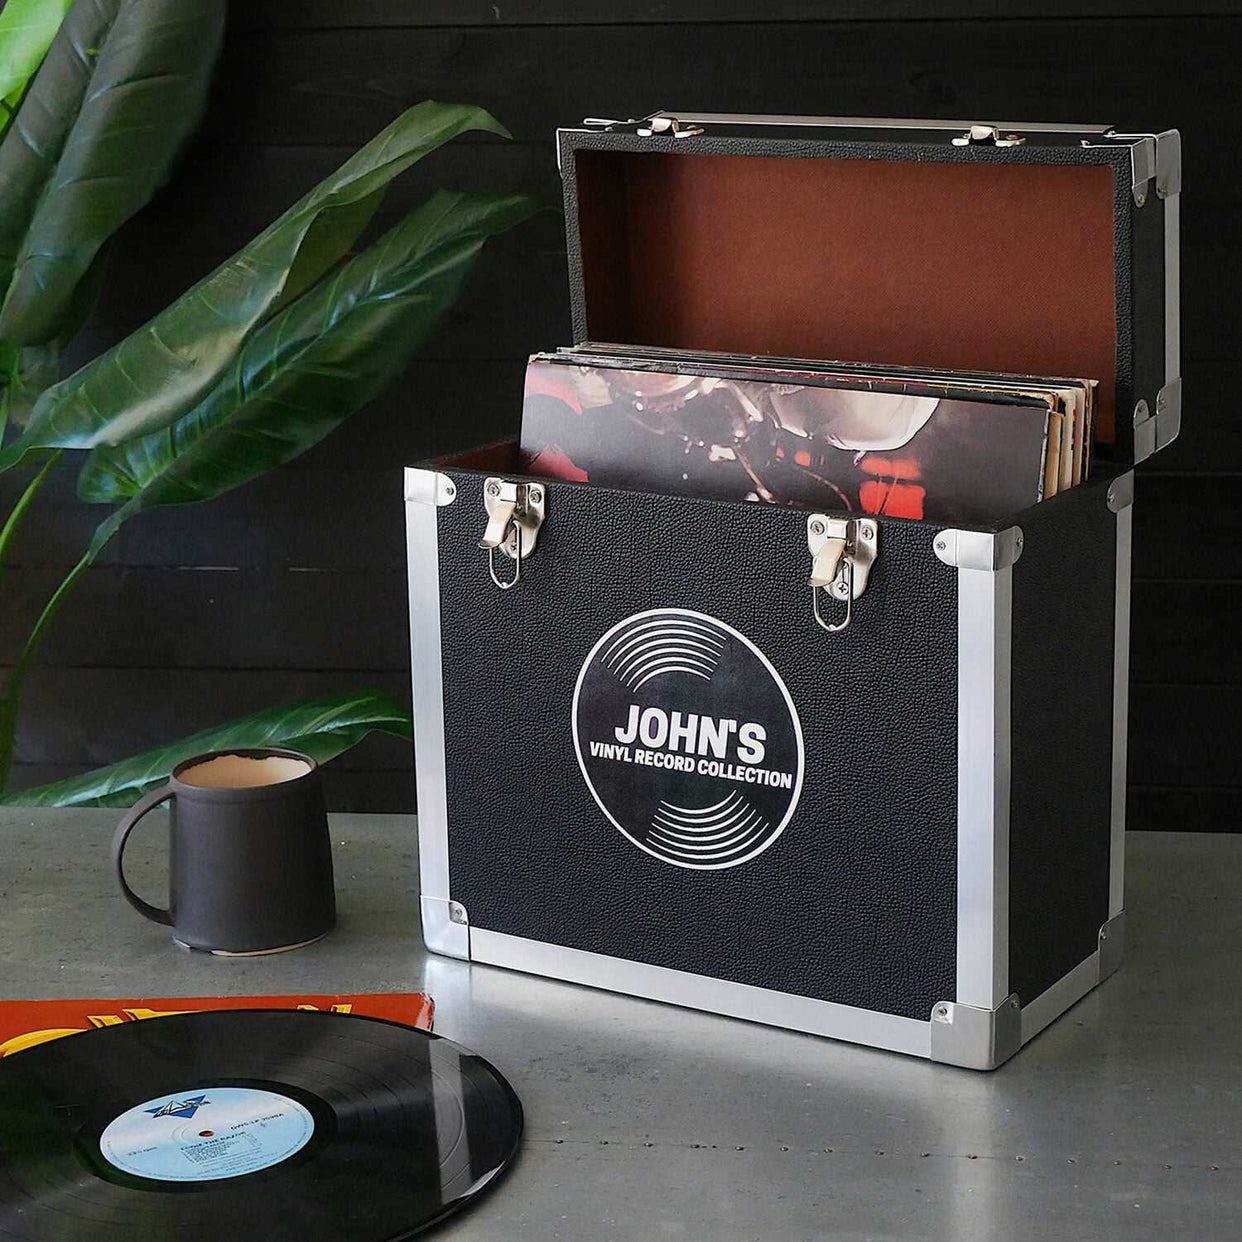 Personalised Music Record Vinyl Storage Box - 12 inch - Black Vinyl - Stores up to 50 records